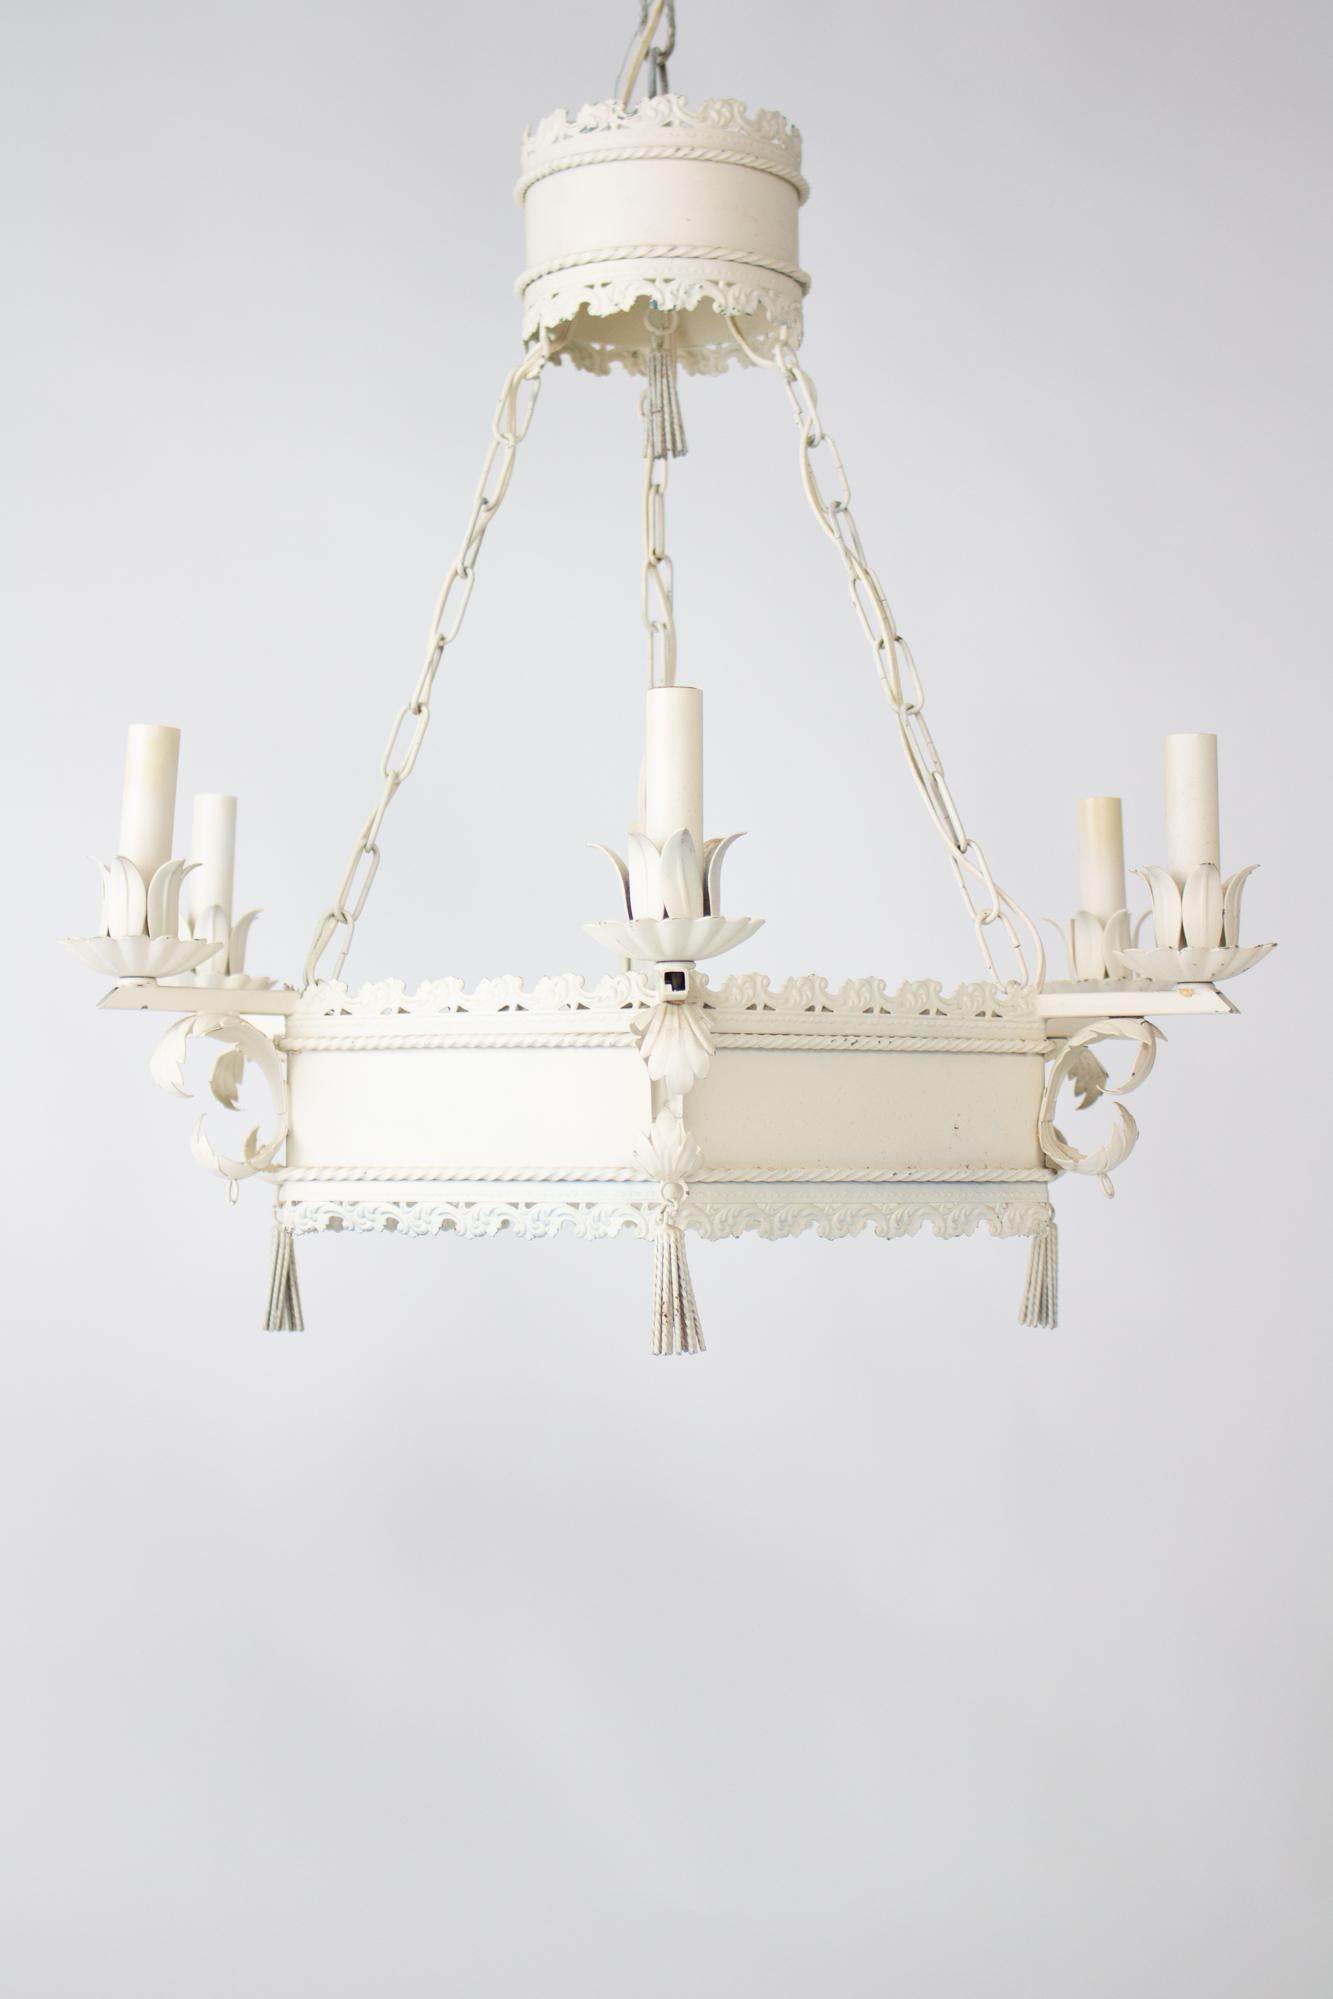 Hollywood Regency Mid 20th Century White Tole Chandelier